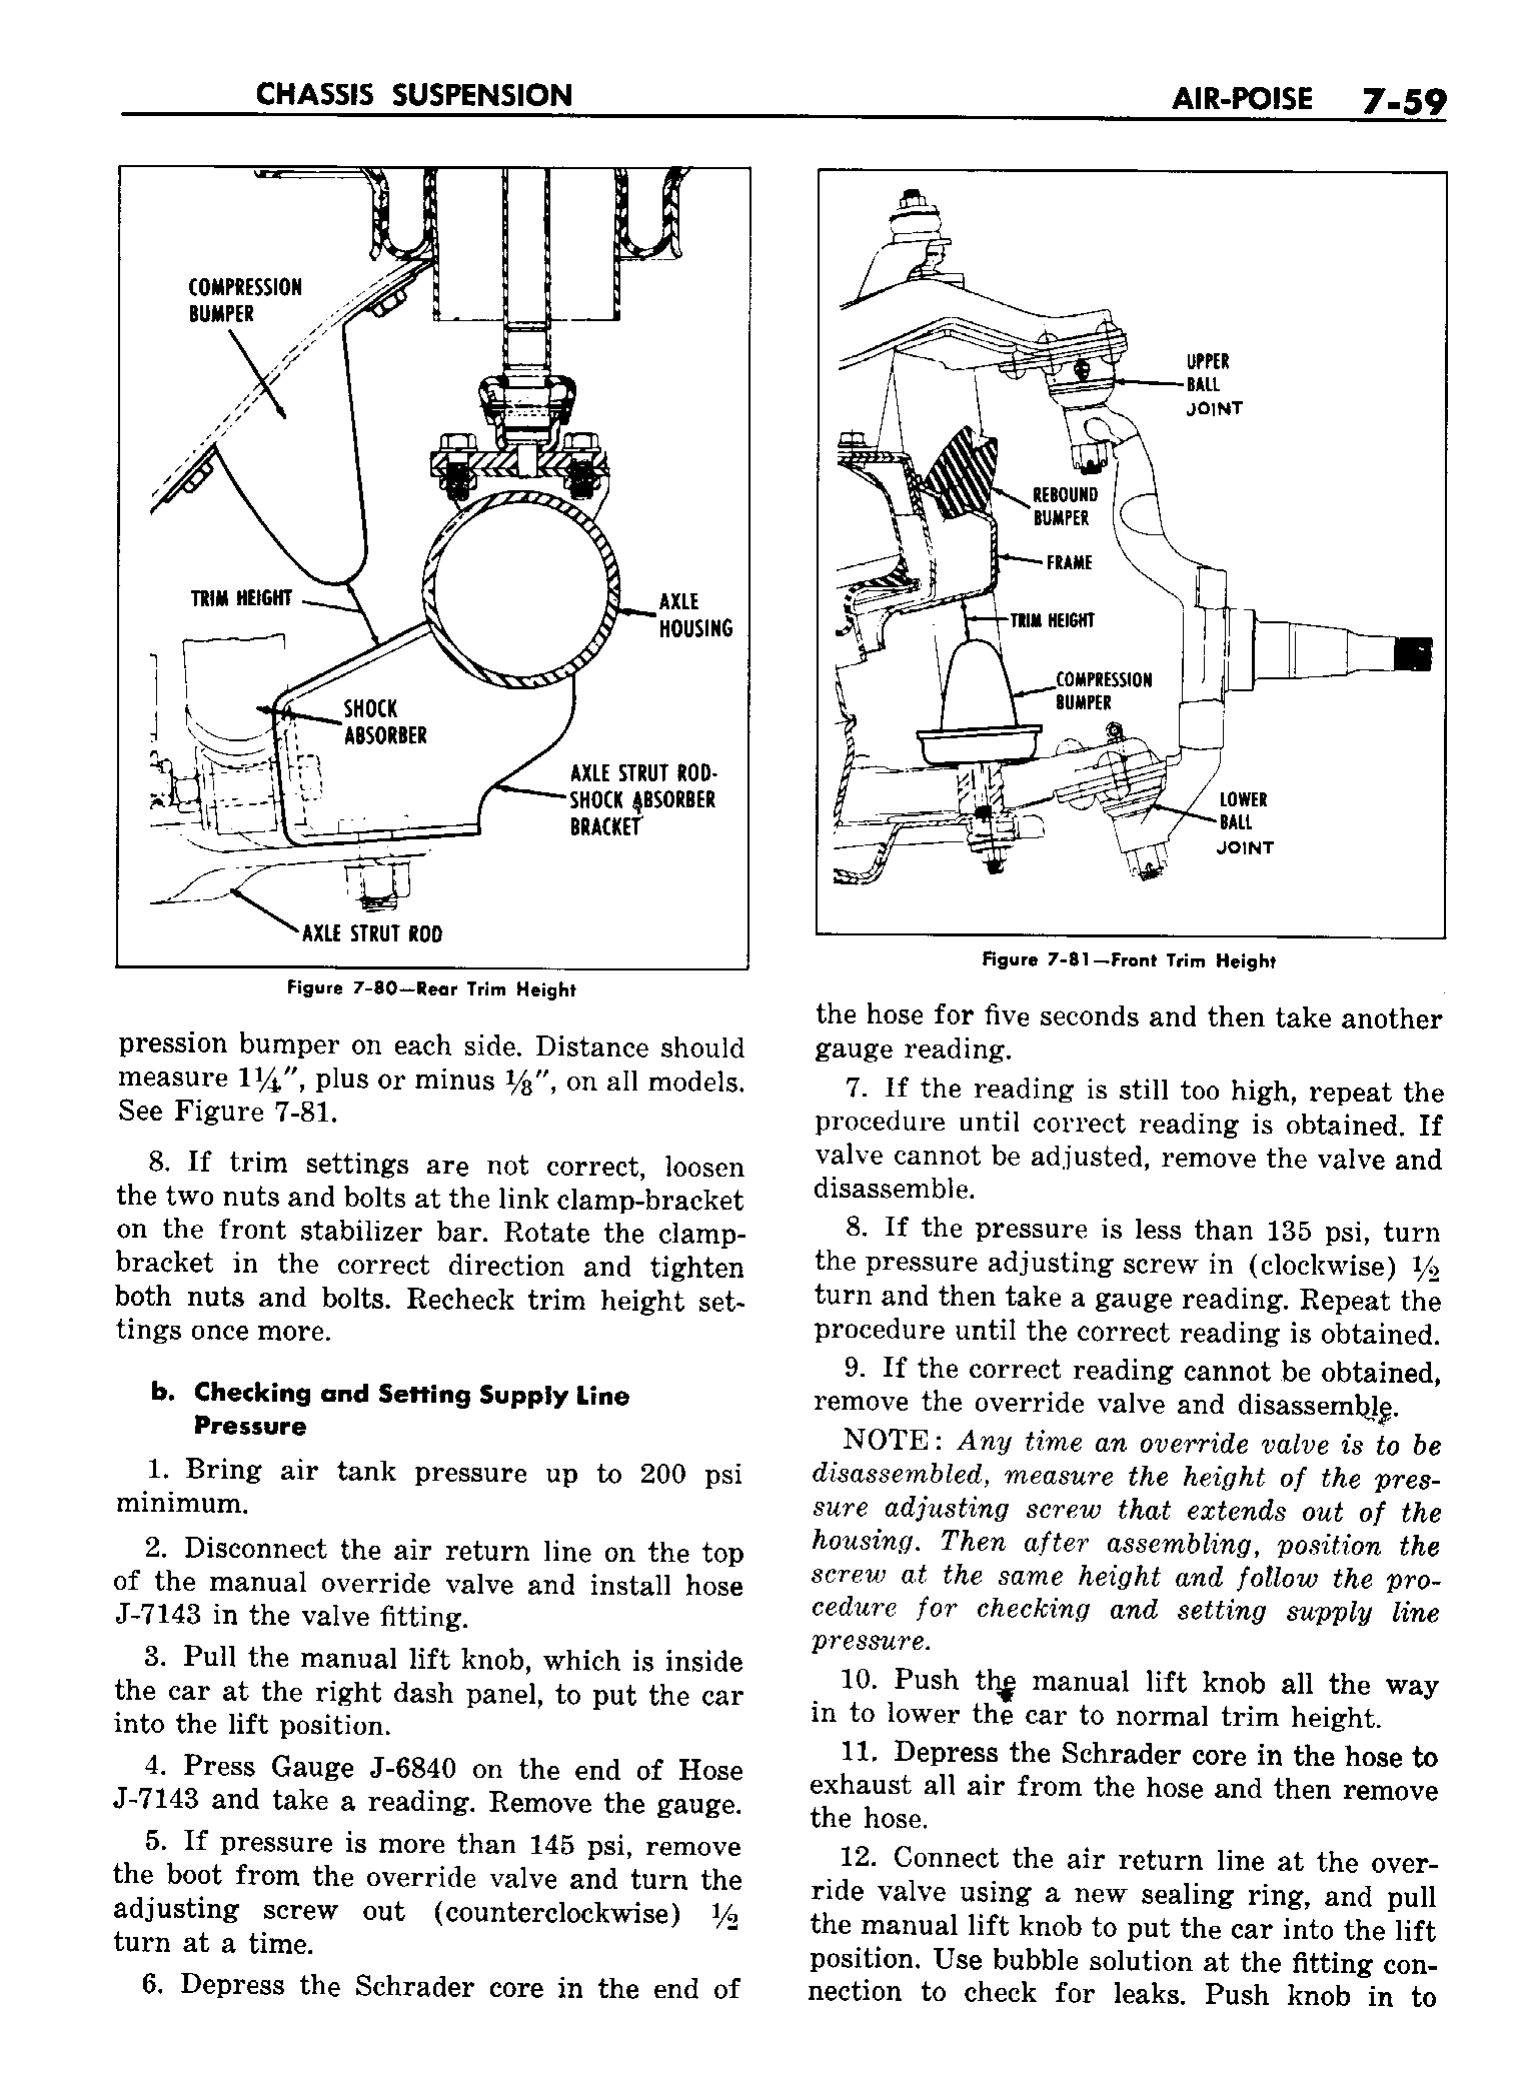 n_08 1958 Buick Shop Manual - Chassis Suspension_59.jpg